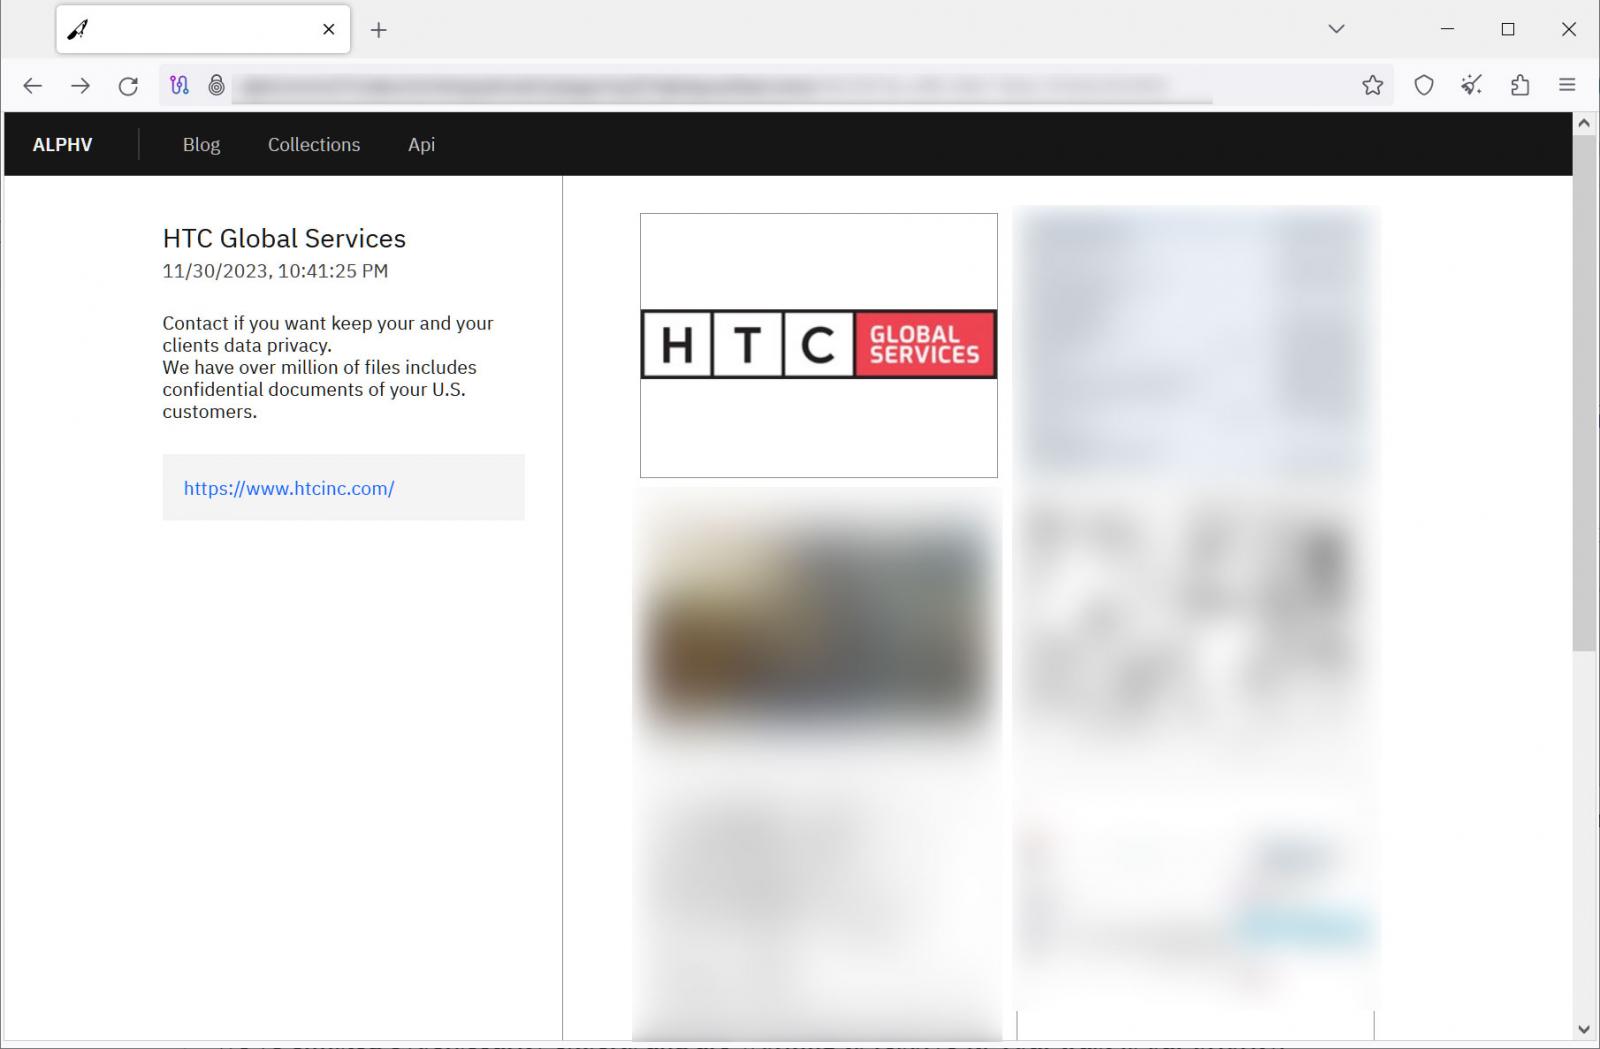 HTC Global Services access on the ALPHV abstracts aperture site